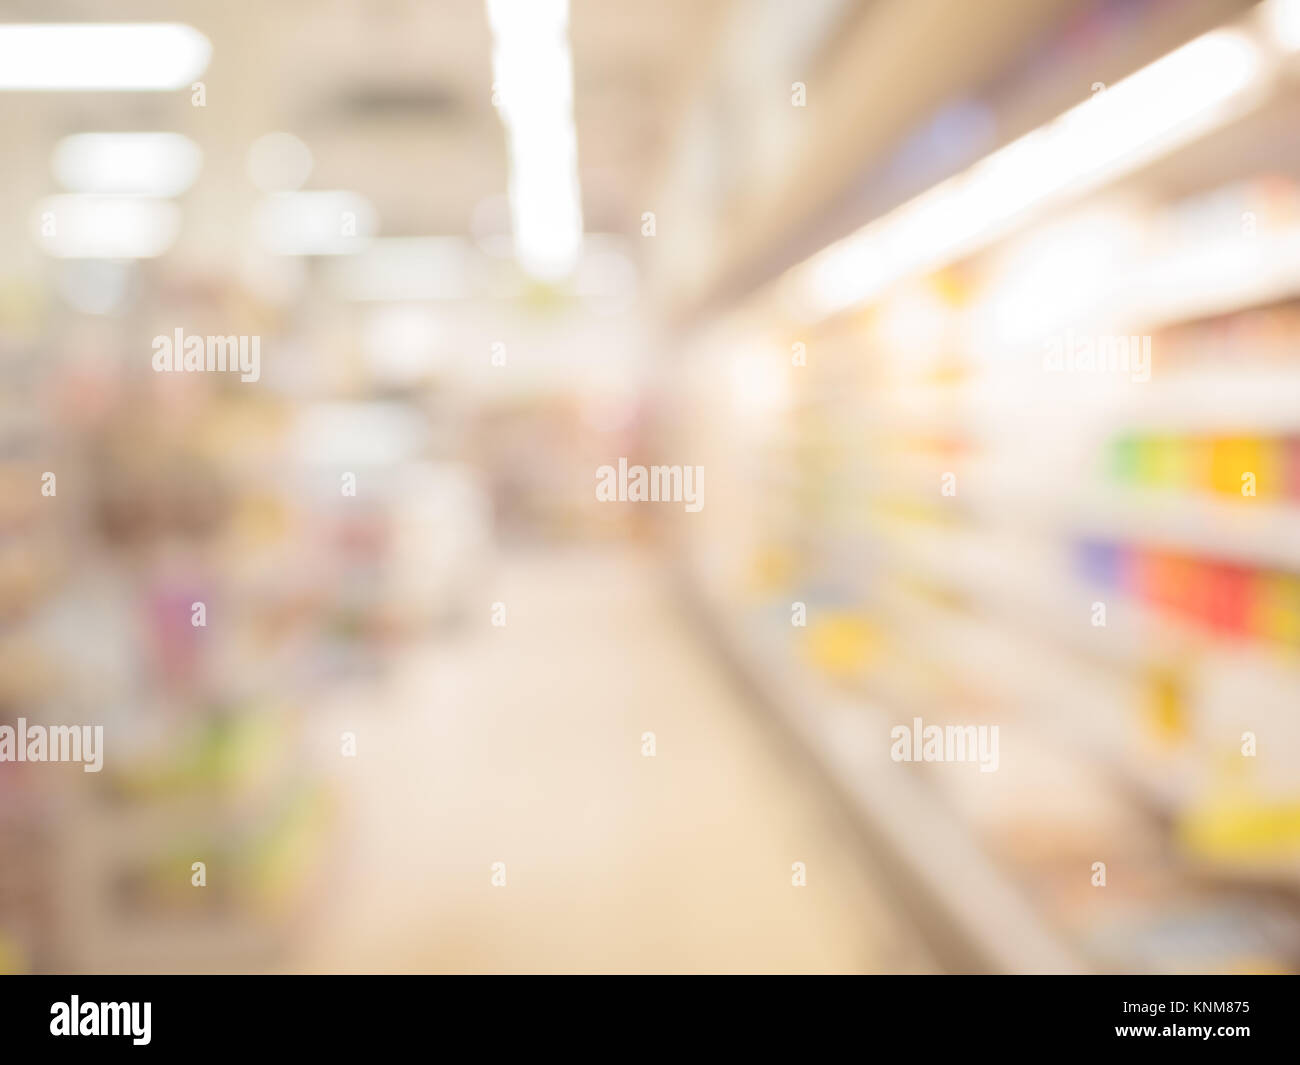 Blurred supermarket pass with colorful shelves as background Stock ...